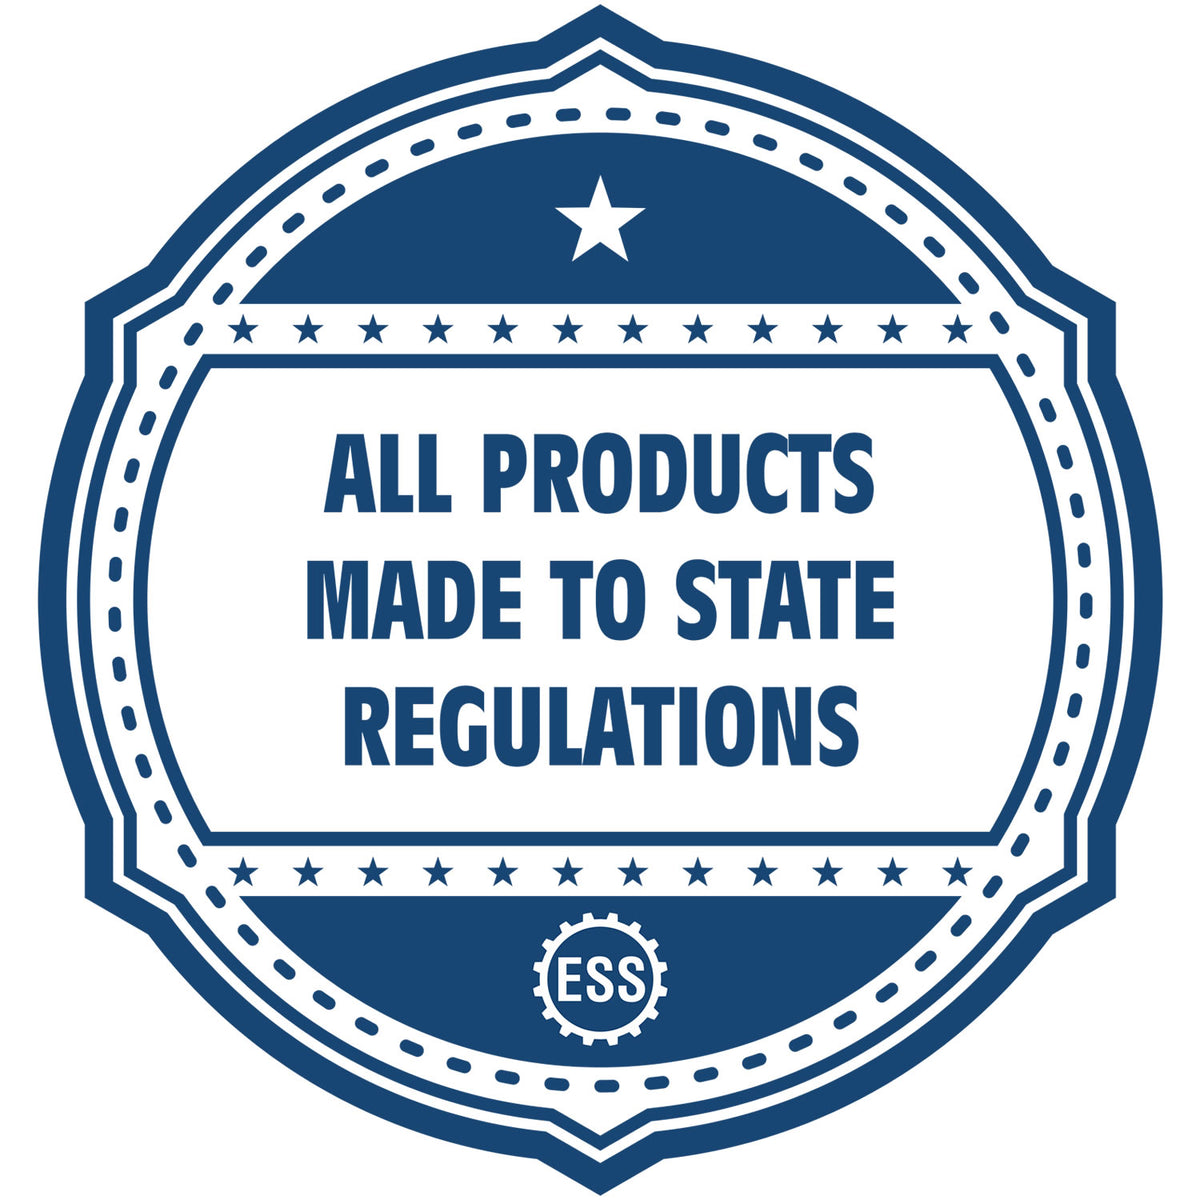 An icon or badge element for the State of Montana Extended Long Reach Engineer Seal showing that this product is made in compliance with state regulations.